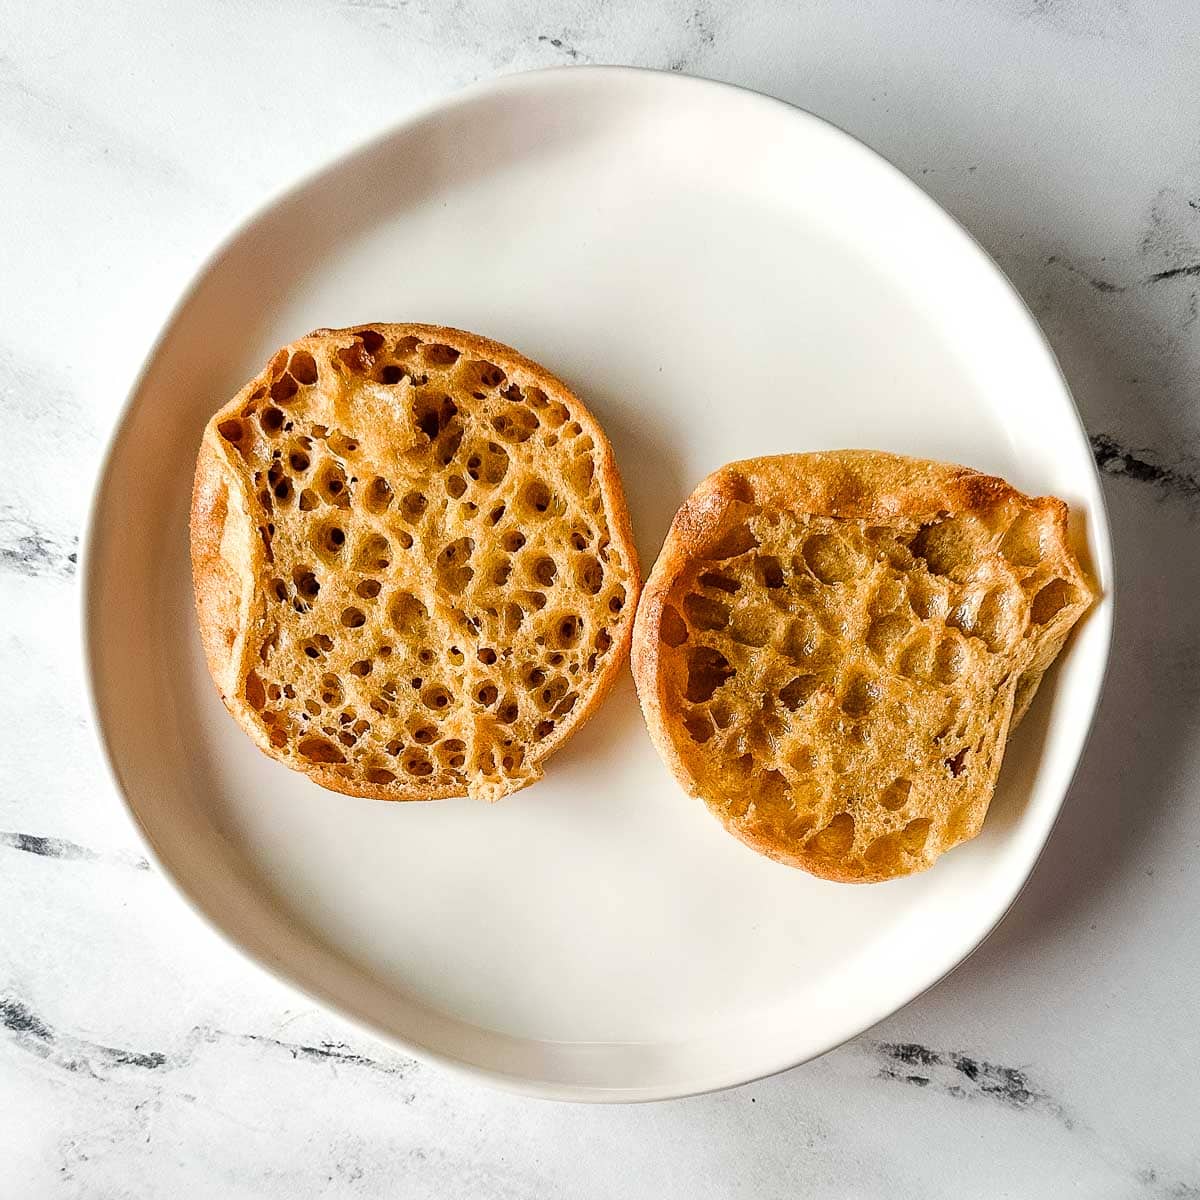 Toasted and buttered English muffin on a white plate.